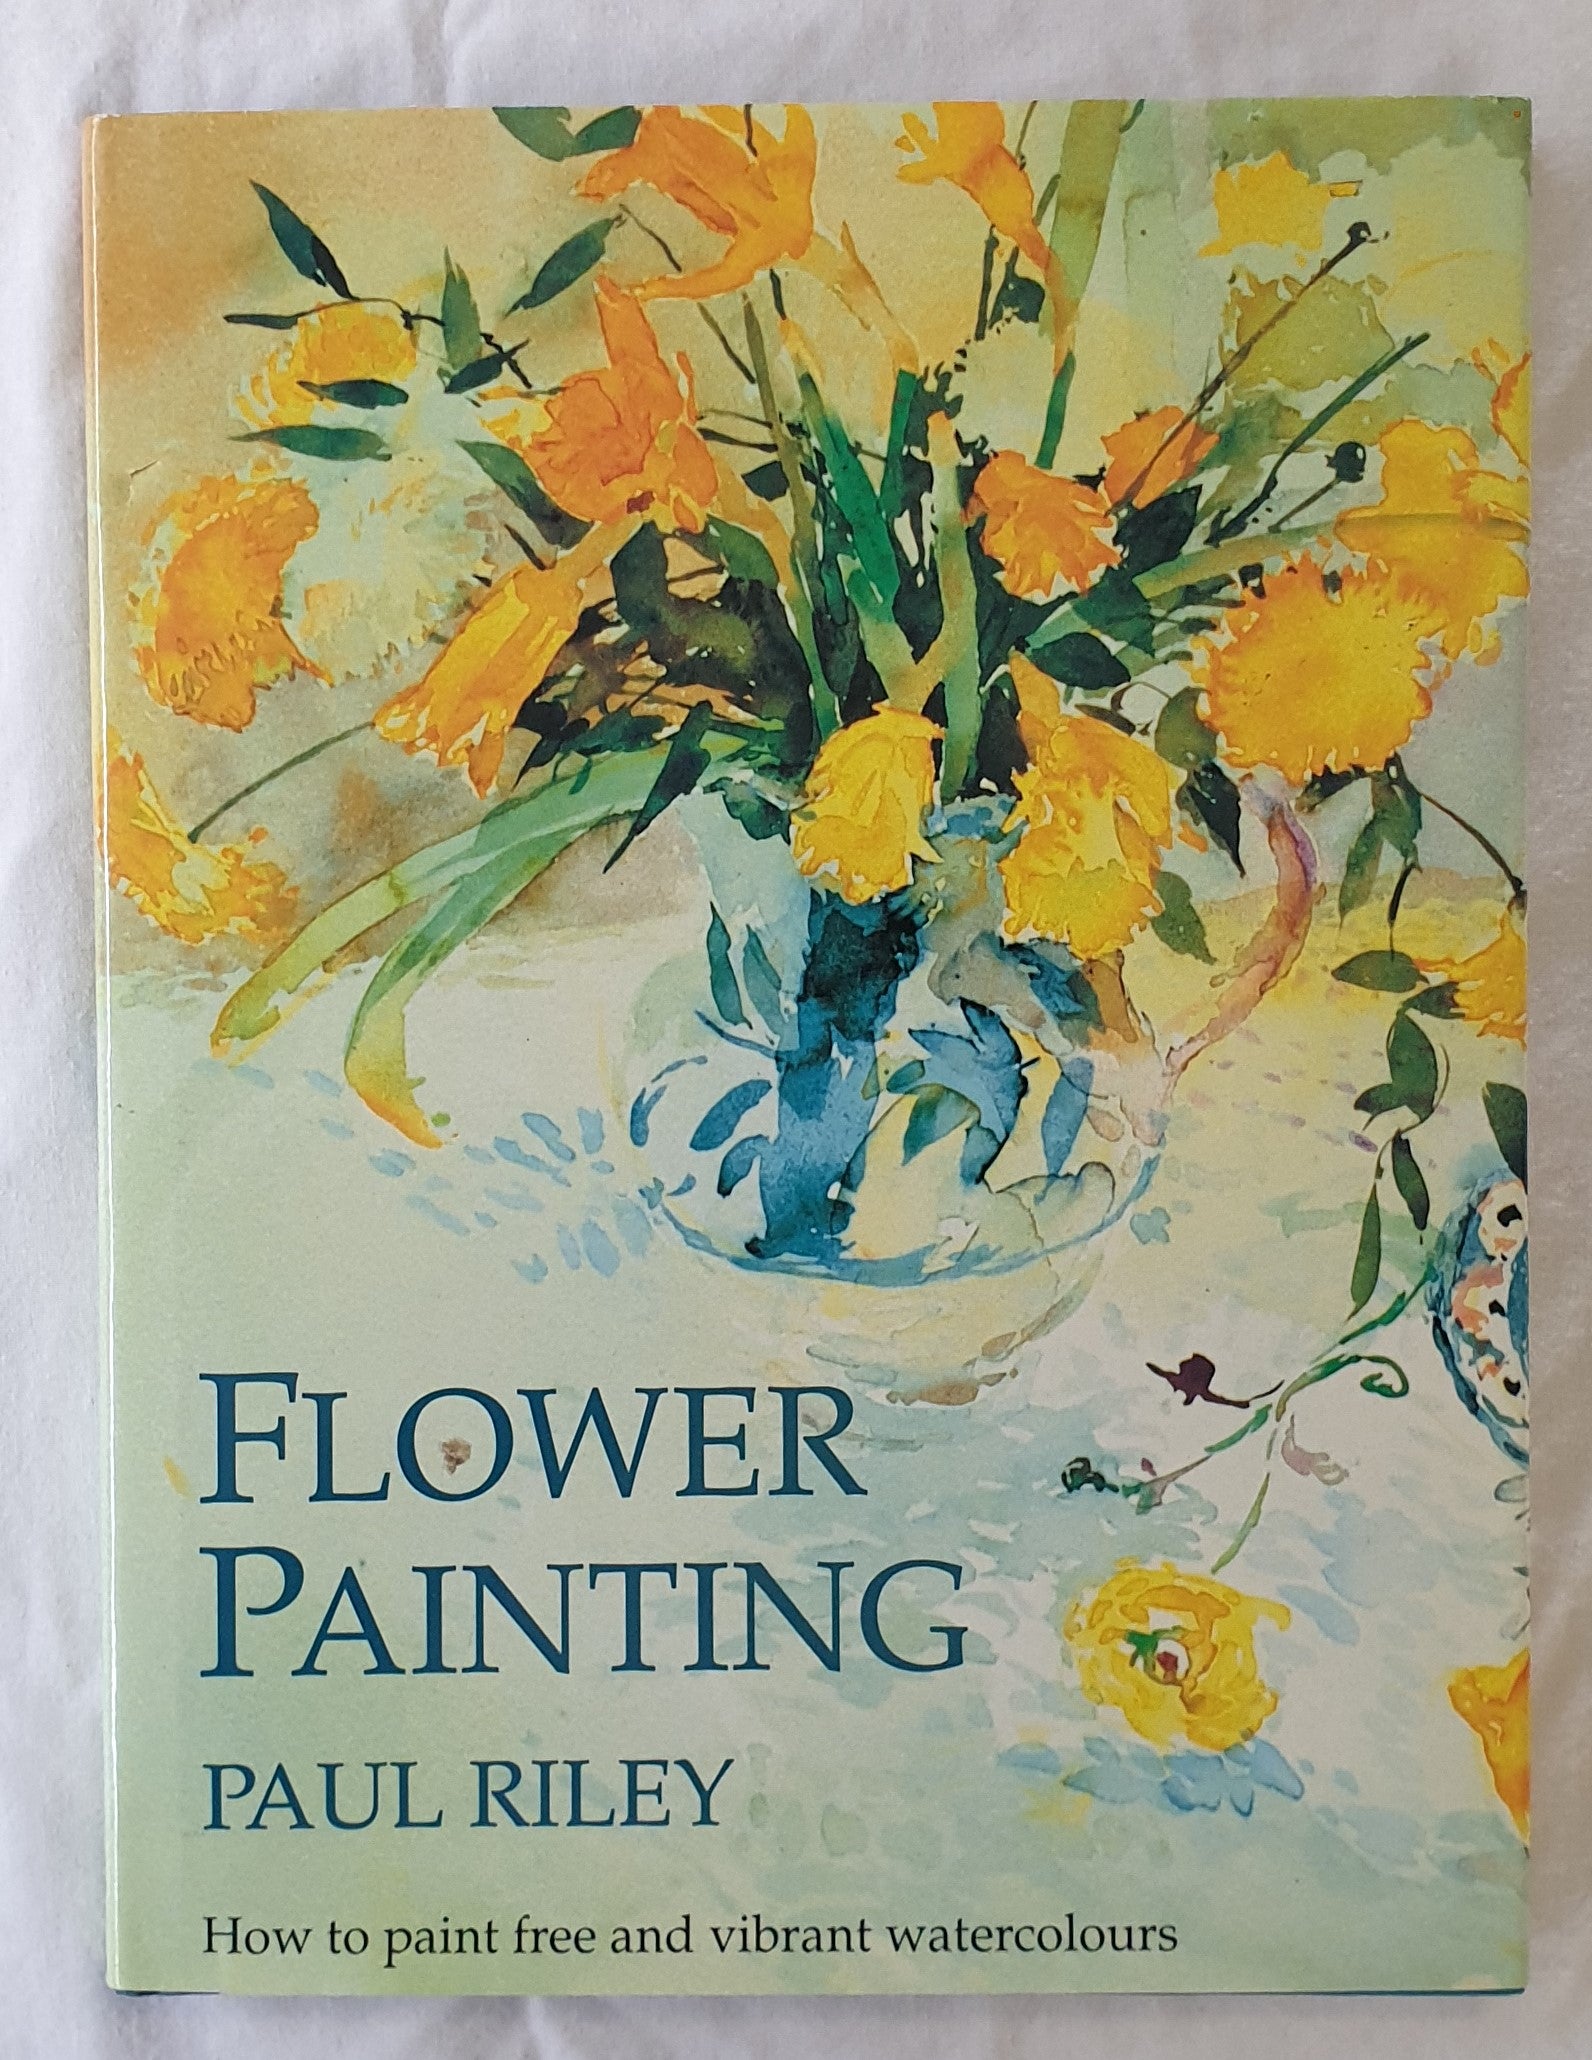 Flower Painting  How to paint free and vibrant watercolours  By Paul Riley